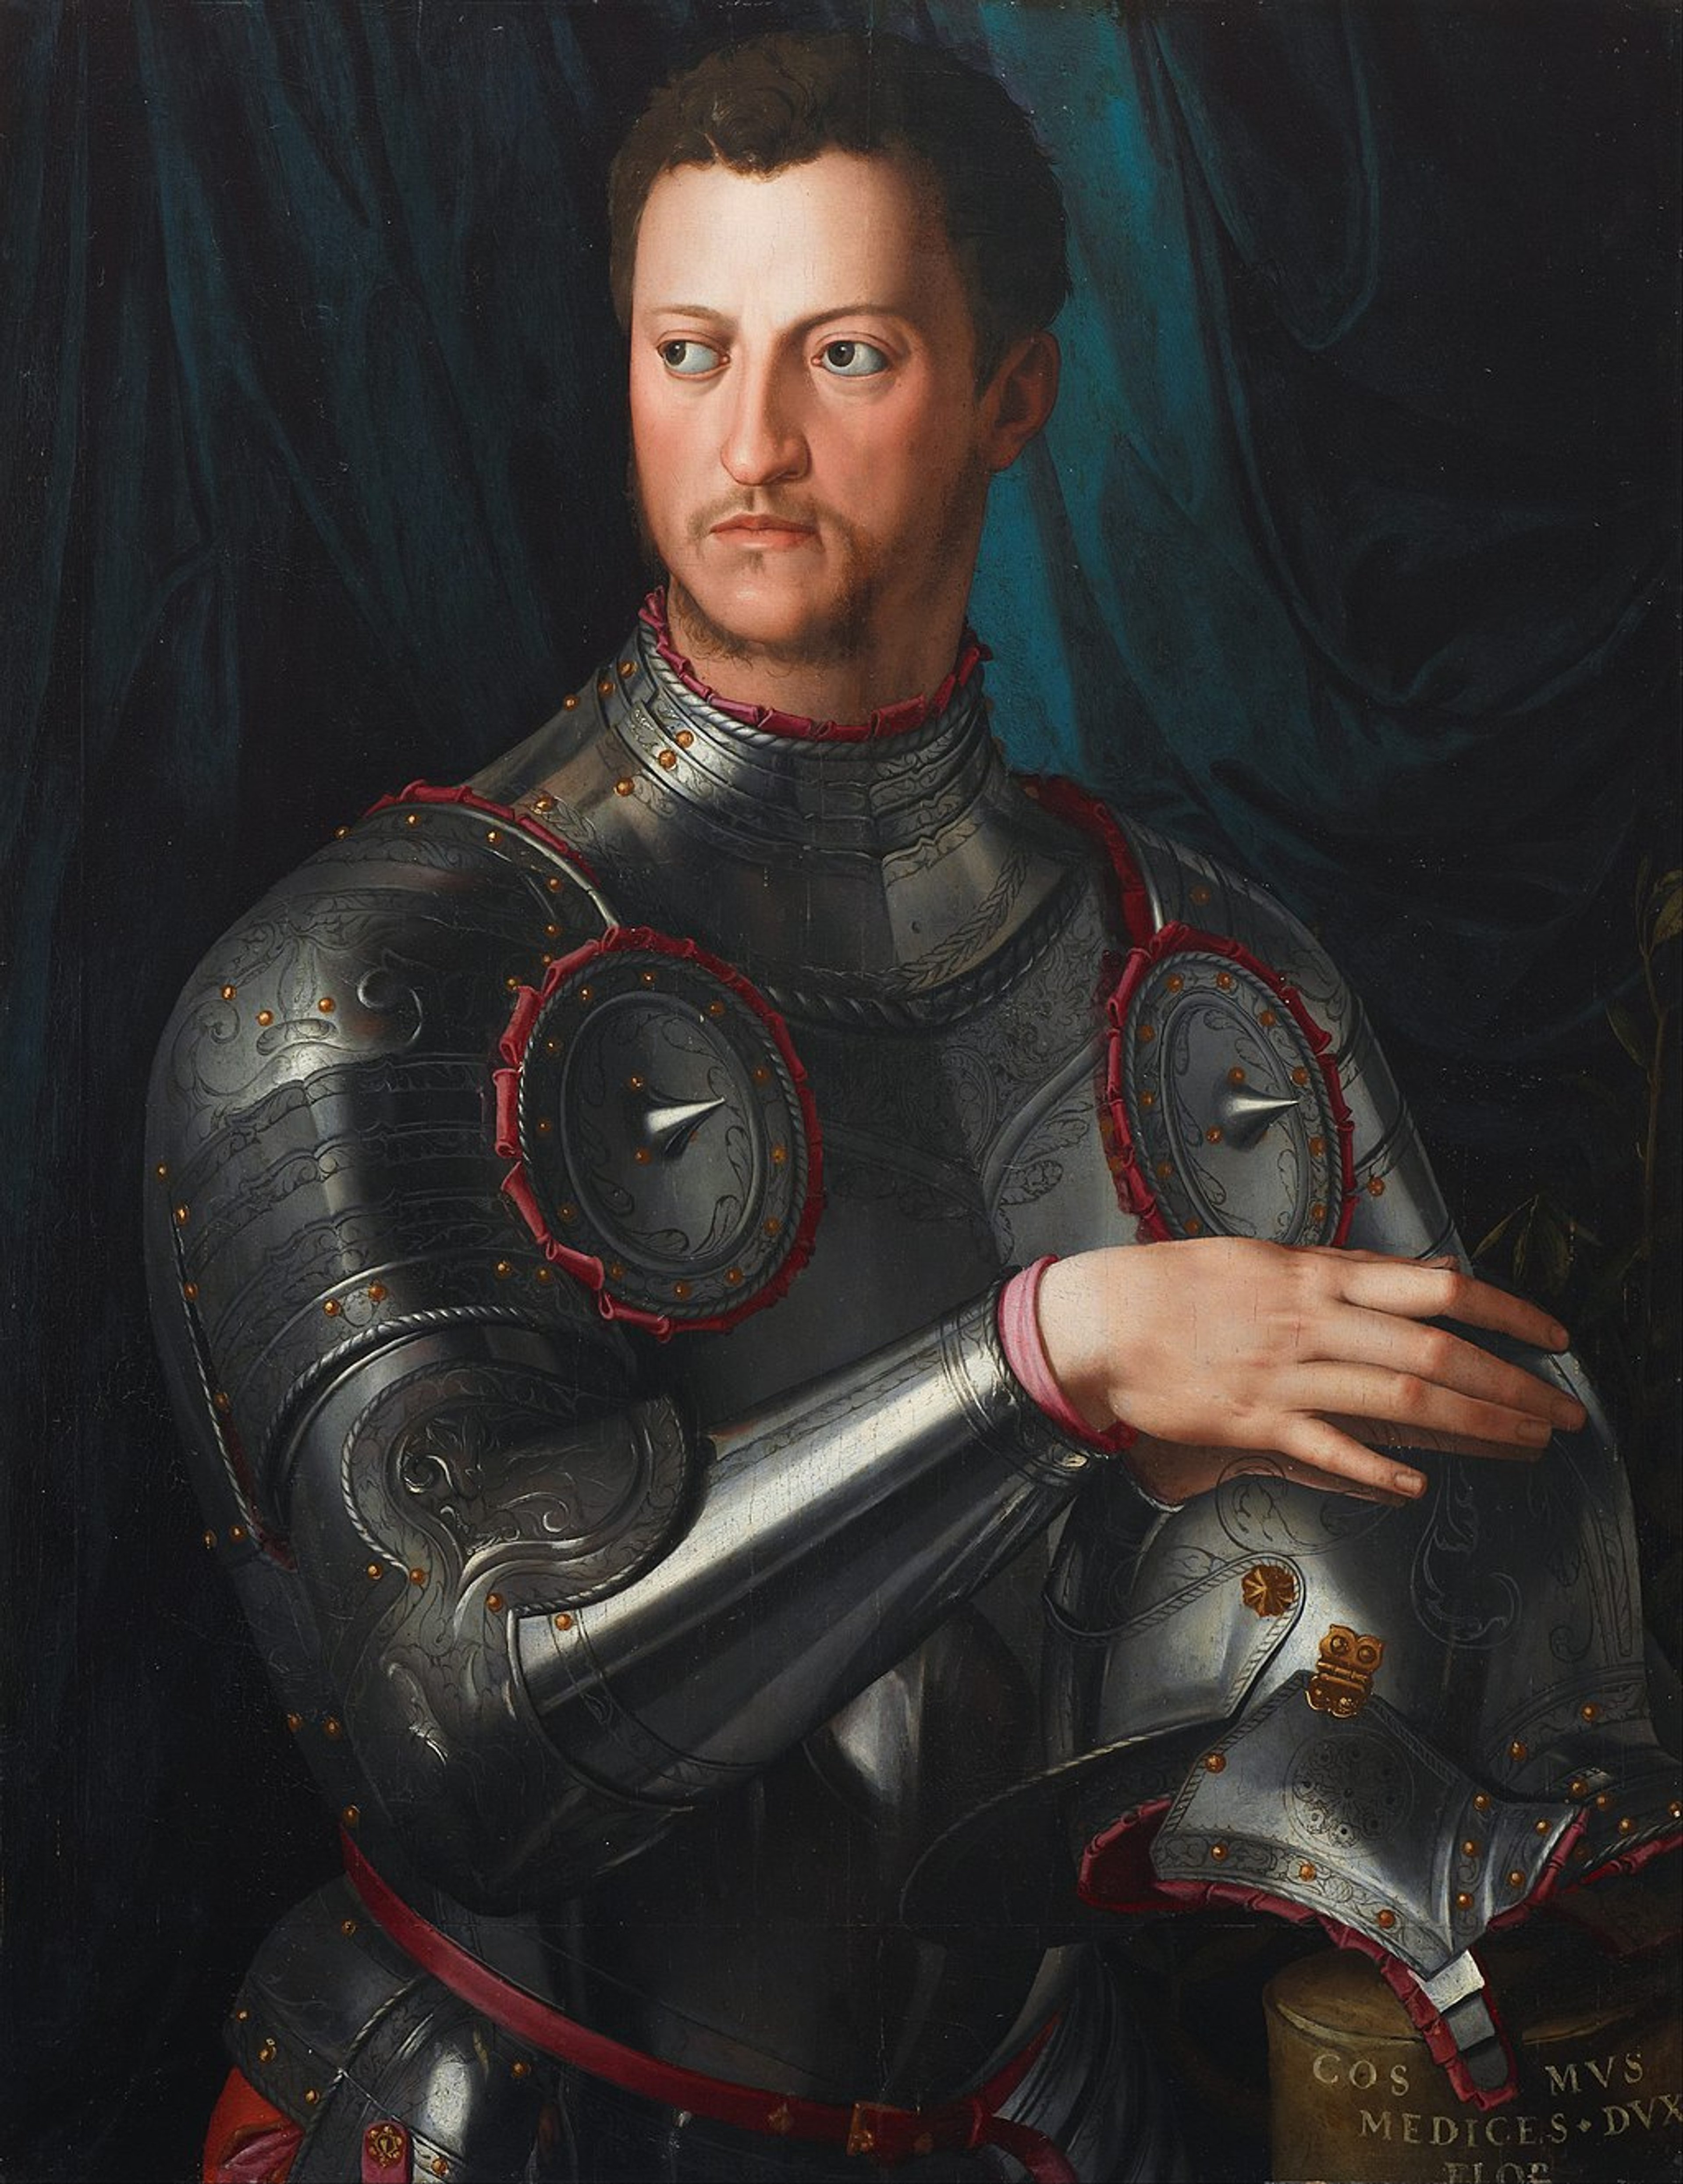 Colourful portrait of Cosimo I de' Medici, Grand Duke of Tuscany, a man with short brown hair, wearing a suit of armour and resting his right hand on a helmet.